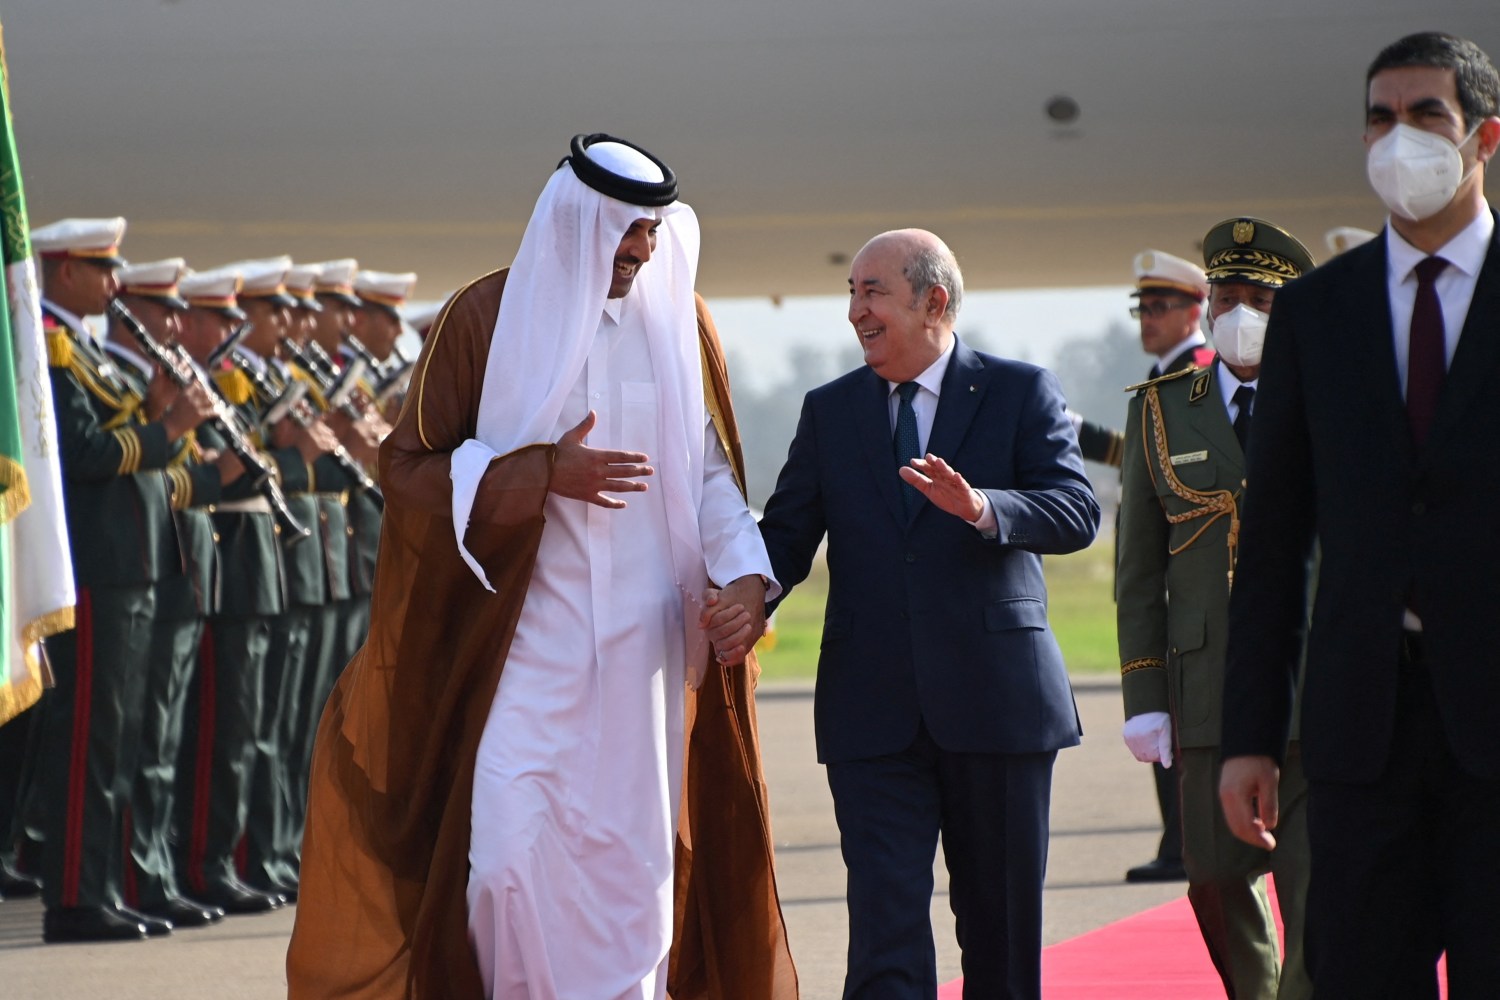 Algerian President Abelmadjid Tebboune welcomes Qatar's Emir Sheikh Tamim bin Hamad al-Thani upon his arrival in Algiers, to attend the Arab League summit, Algeria November 1, 2022. Algerian Presidency /Handout via REUTERS ATTENTION EDITORS - THIS IMAGE HAS BEEN SUPPLIED BY A THIRD PARTY.  NO RESALES. NO ARCHIVES.